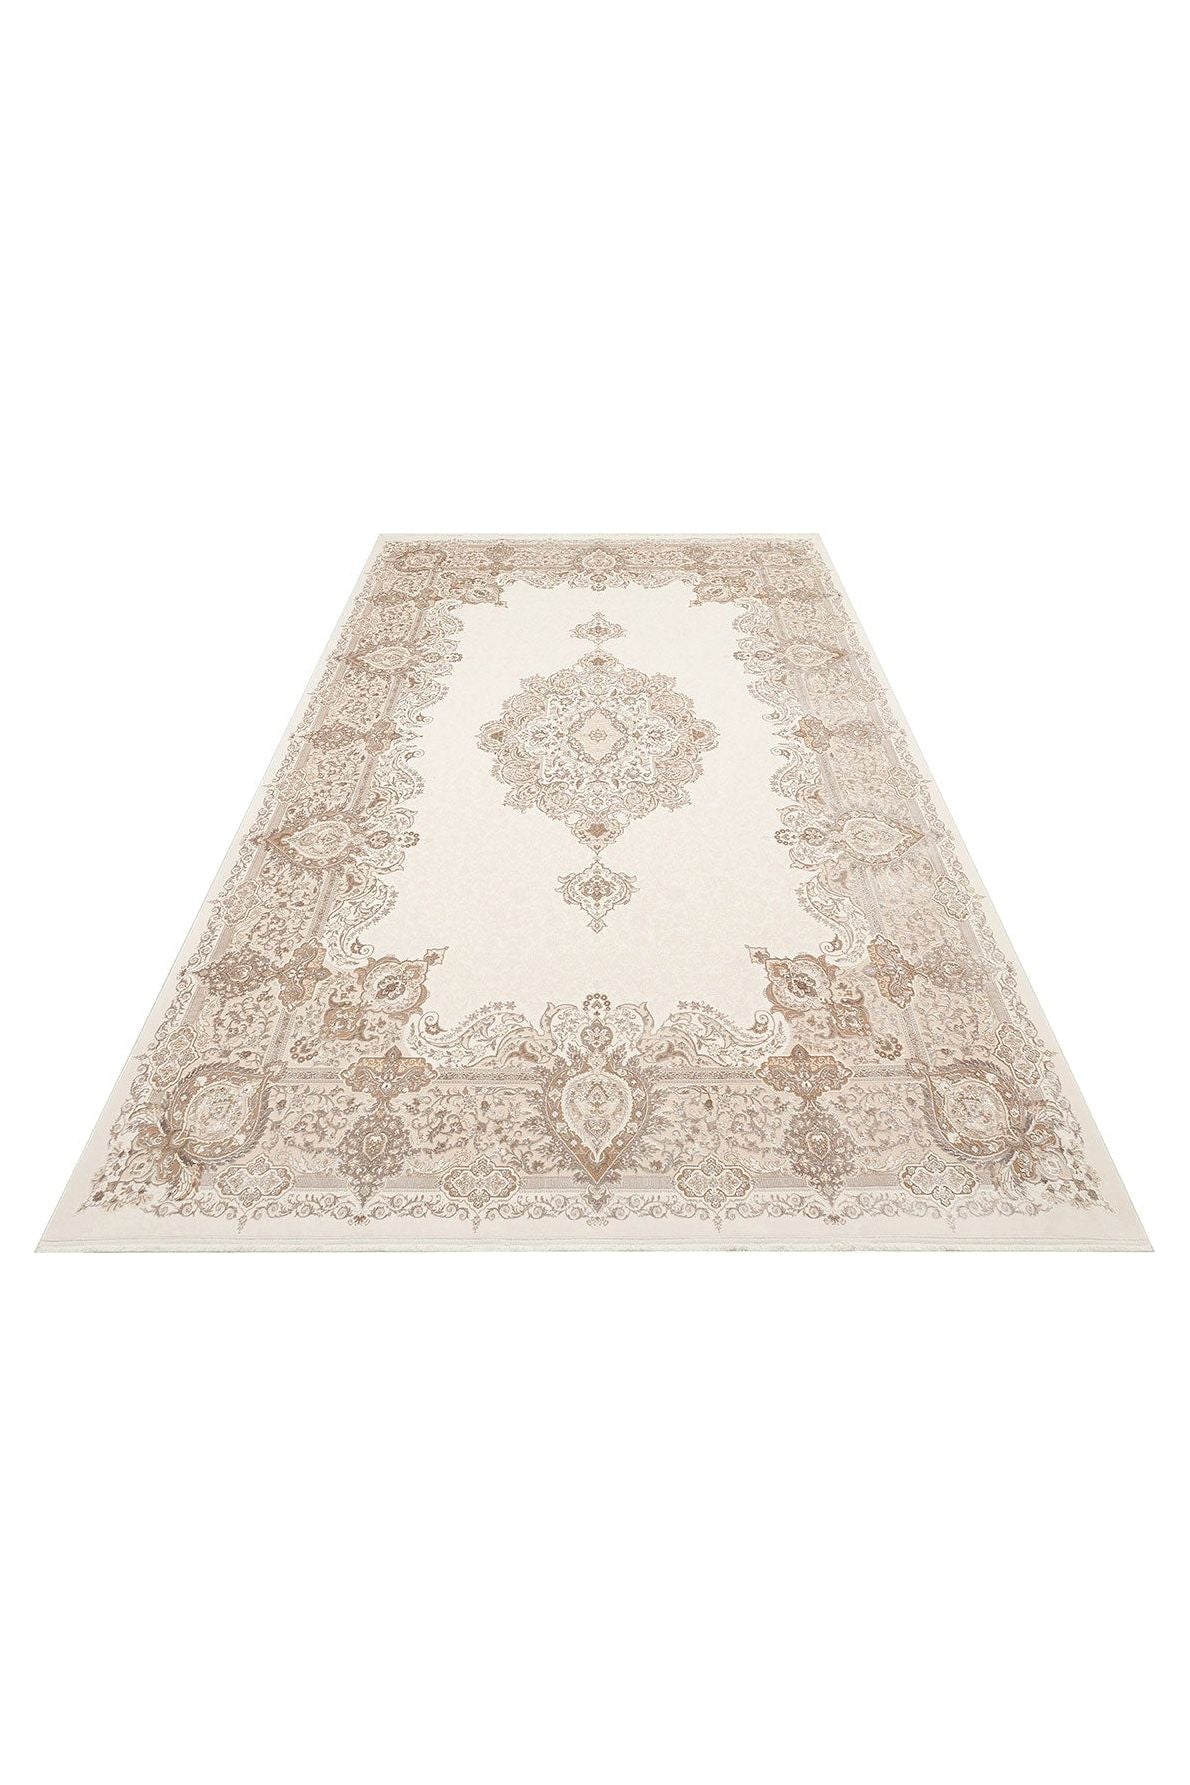 #Turkish_Carpets_Rugs# #Modern_Carpets# #Abrash_Carpets#High Density Woven Modern Made Carpet With Acrylic And ViscosePlm 01 Cream Beige